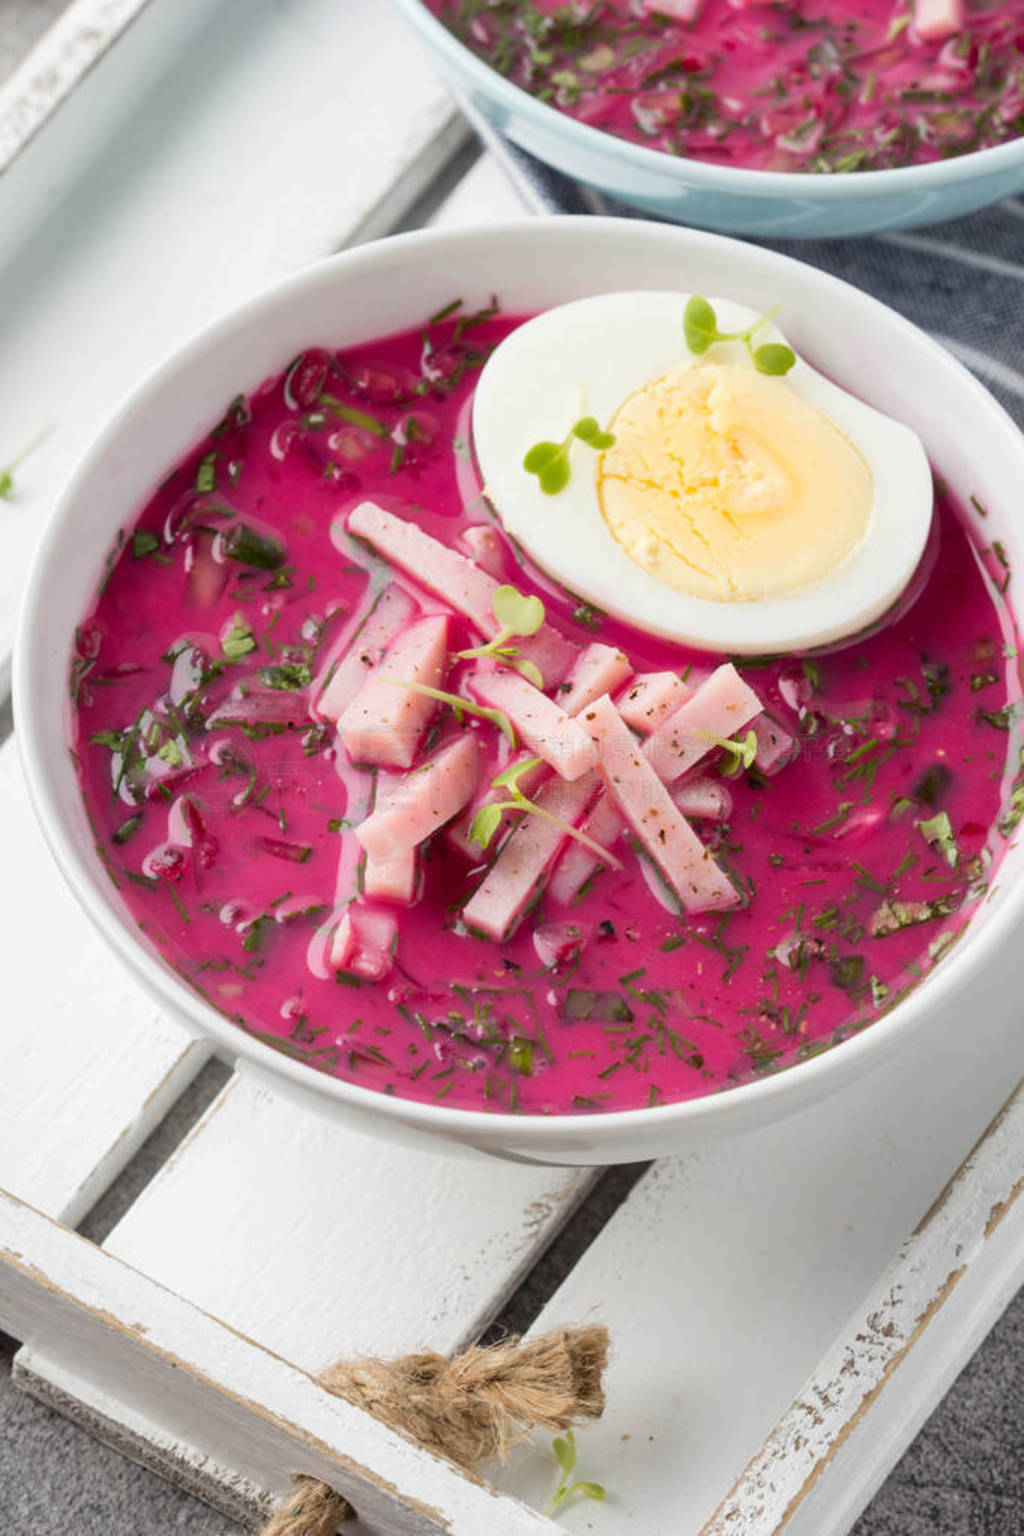 Cold beet soup, traditional Lithuanian dish, summer food. Fresh